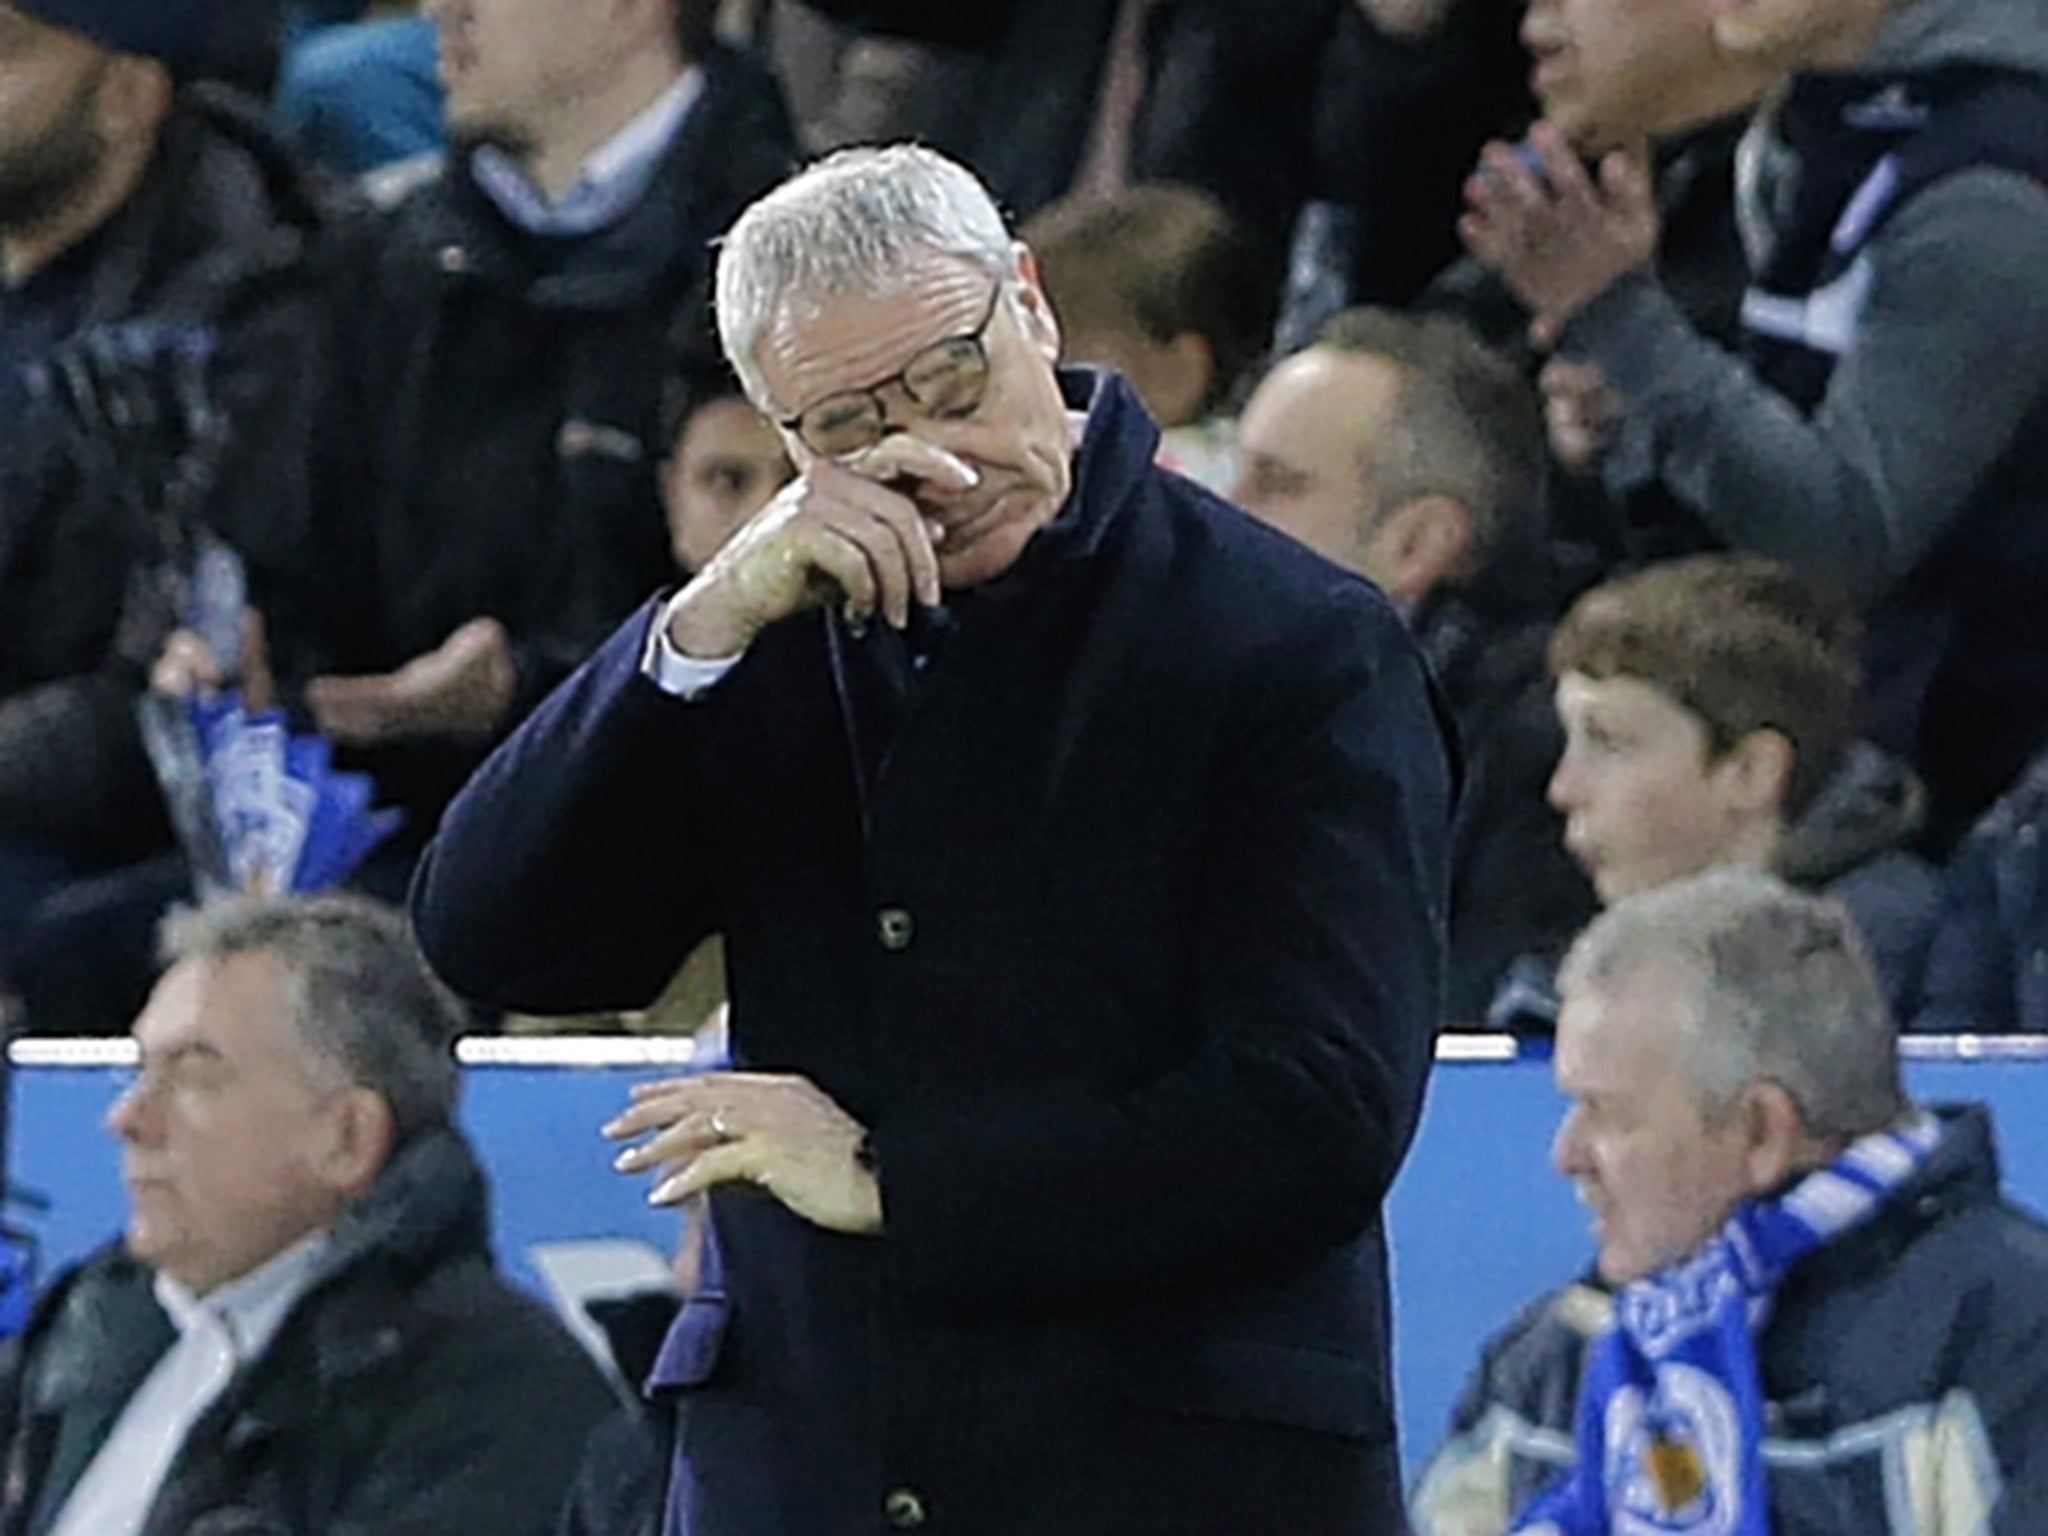 Claudio Ranieri shows signs of pressure on the touchline last night – in contrast to his usually carefree attitude